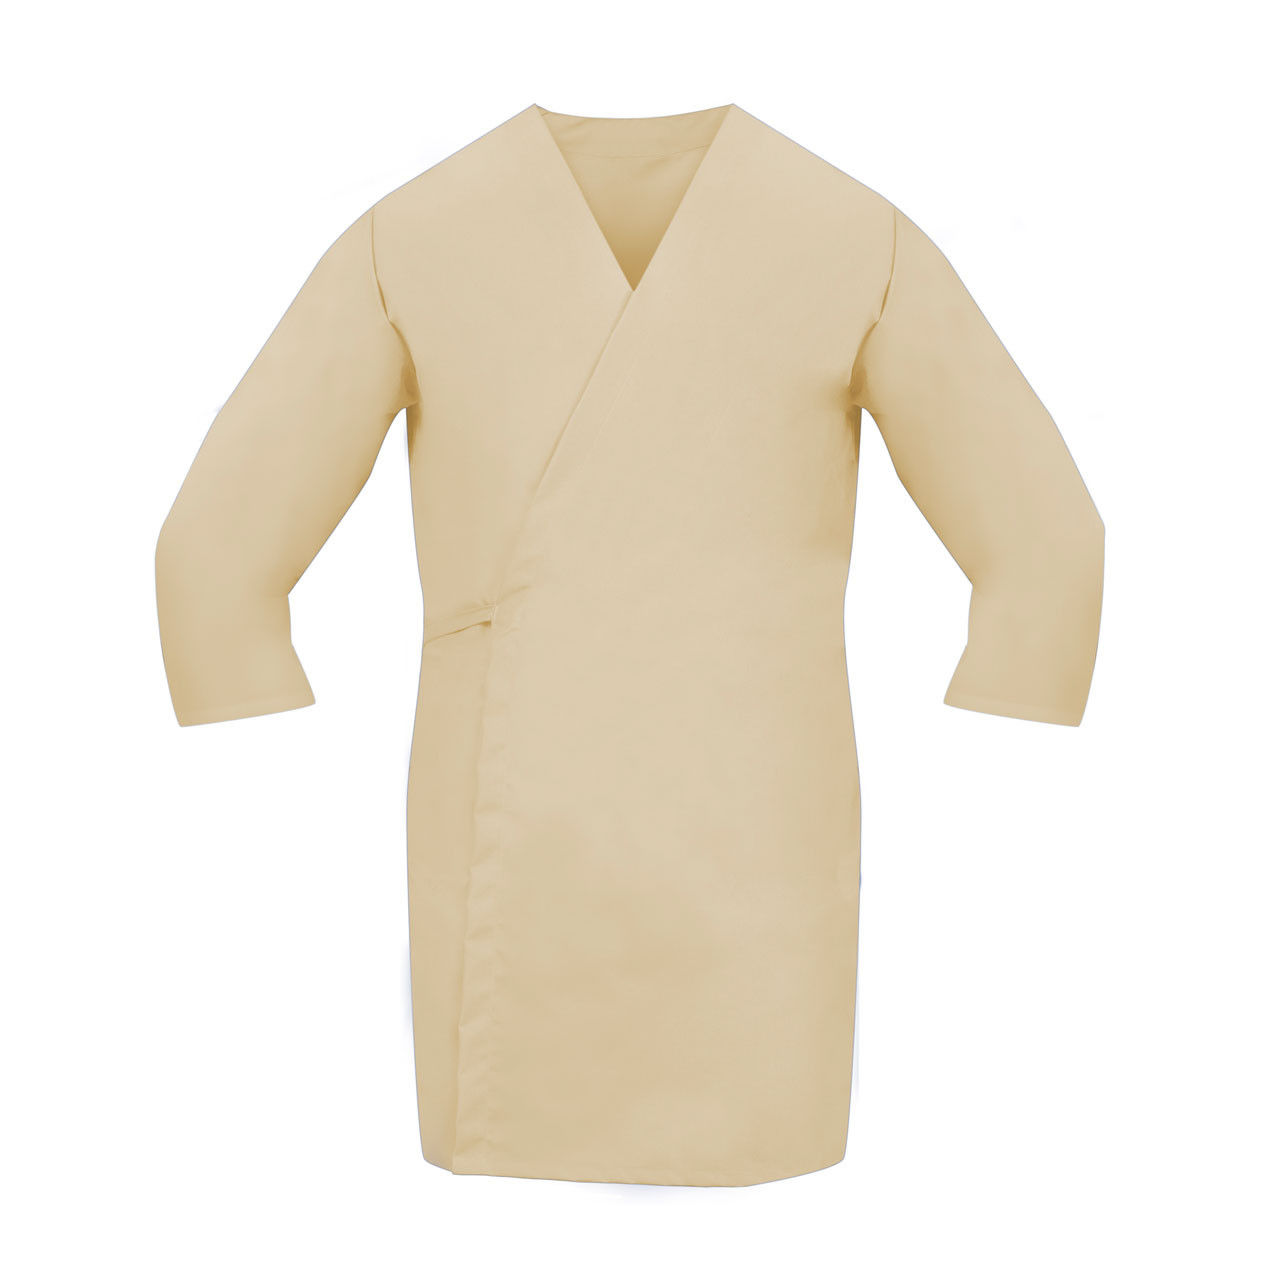 What is the length of the sleeves on the Tan Smock Wraps?